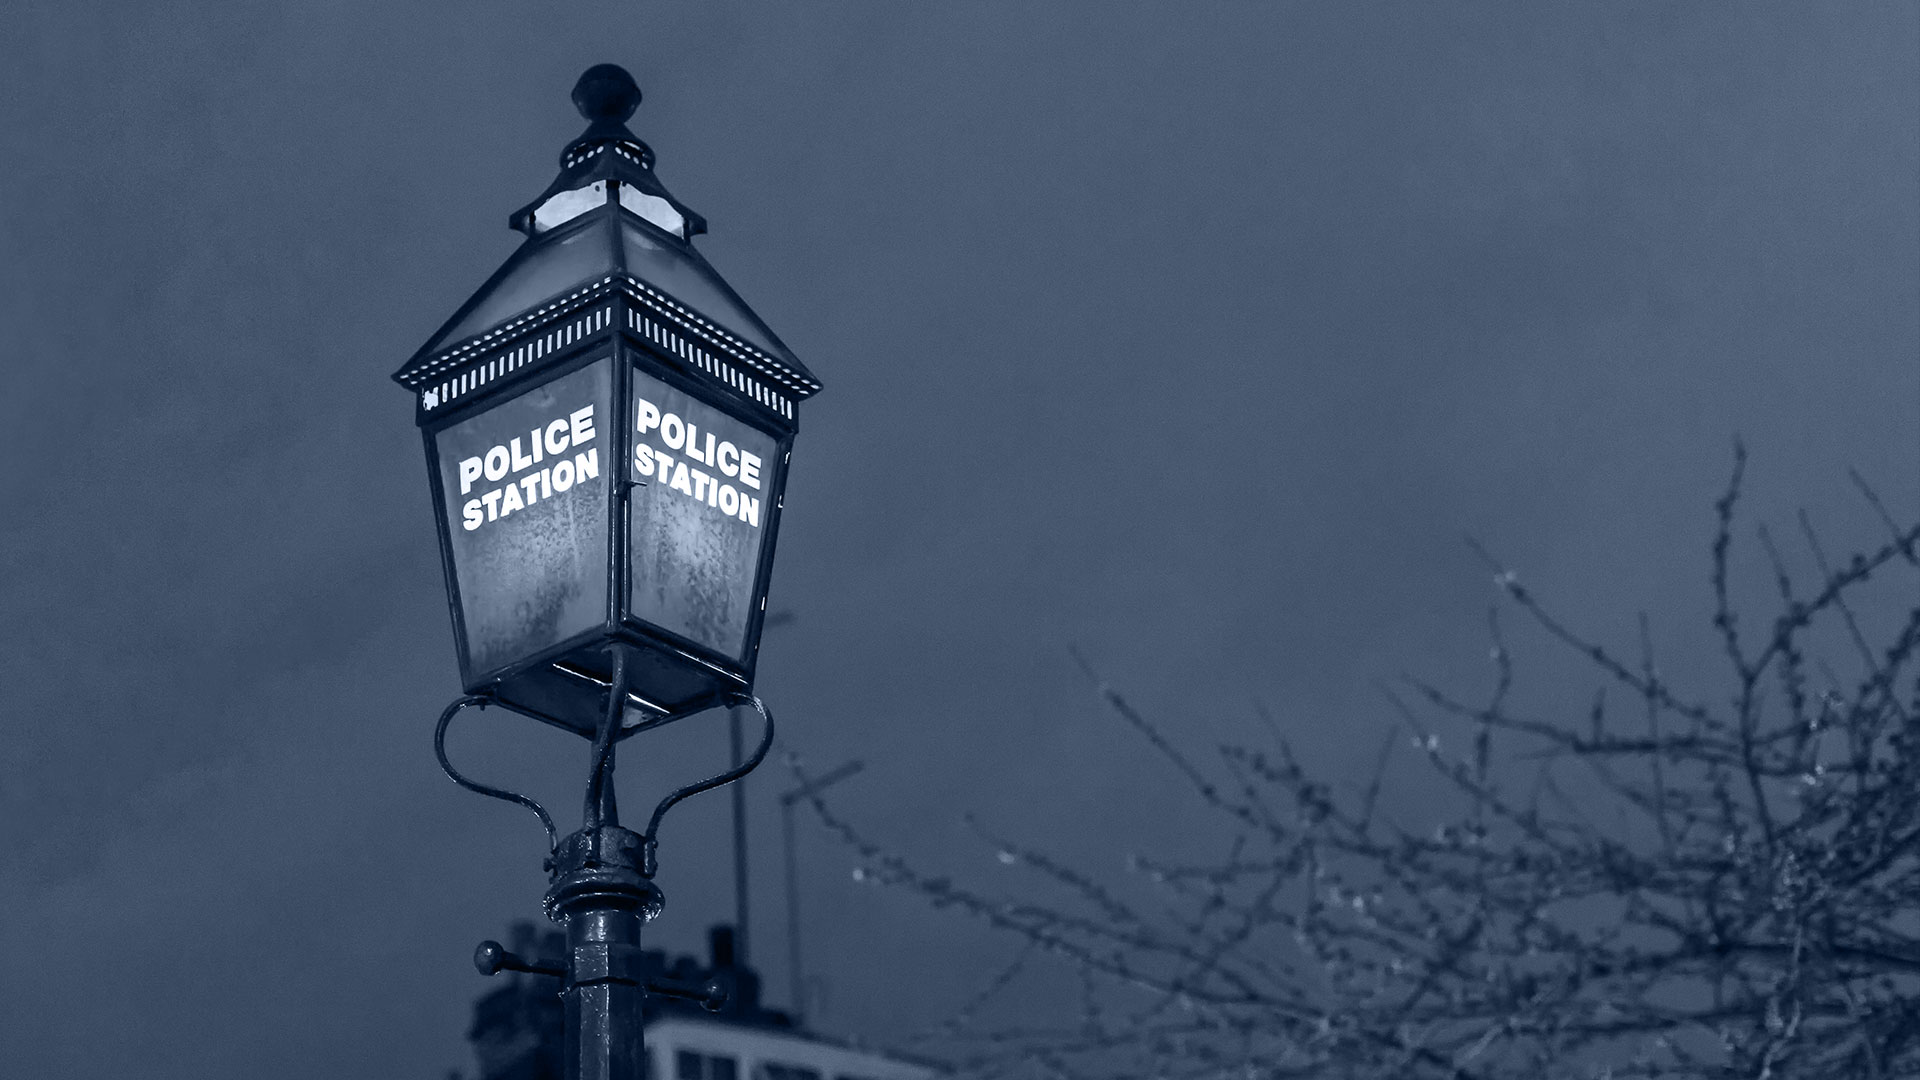 Police Station lamppost.